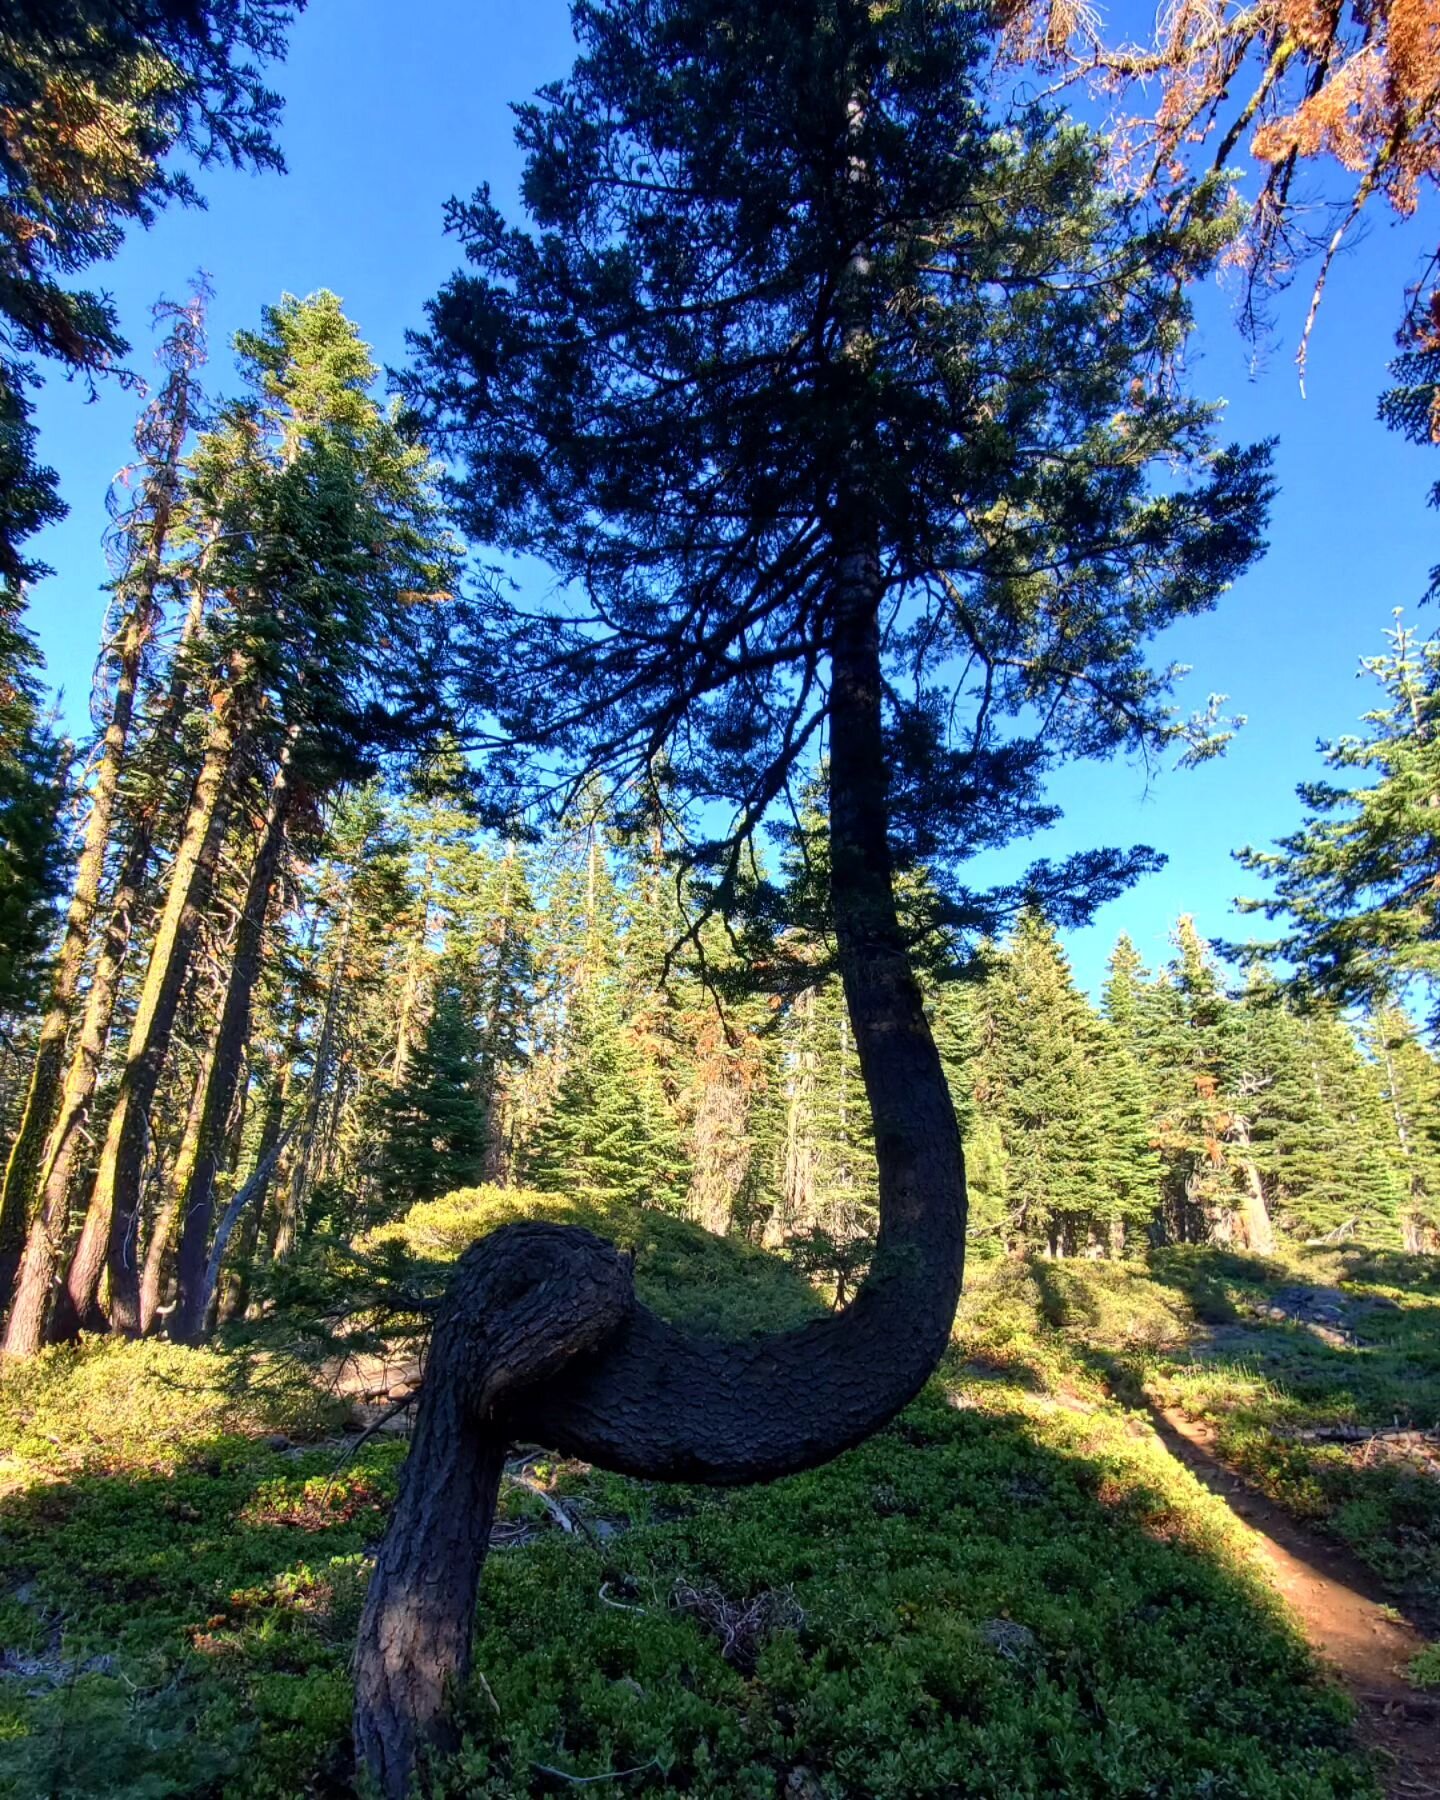 PCT journal, 2 years ago today:

&quot;Got a nice early start, despite not feeling that great. Felt slow at first and didn't want to get to (very weird dreams).&quot;

Same, past self. Same.

A whimsical tree will improve things always though. 

#pct